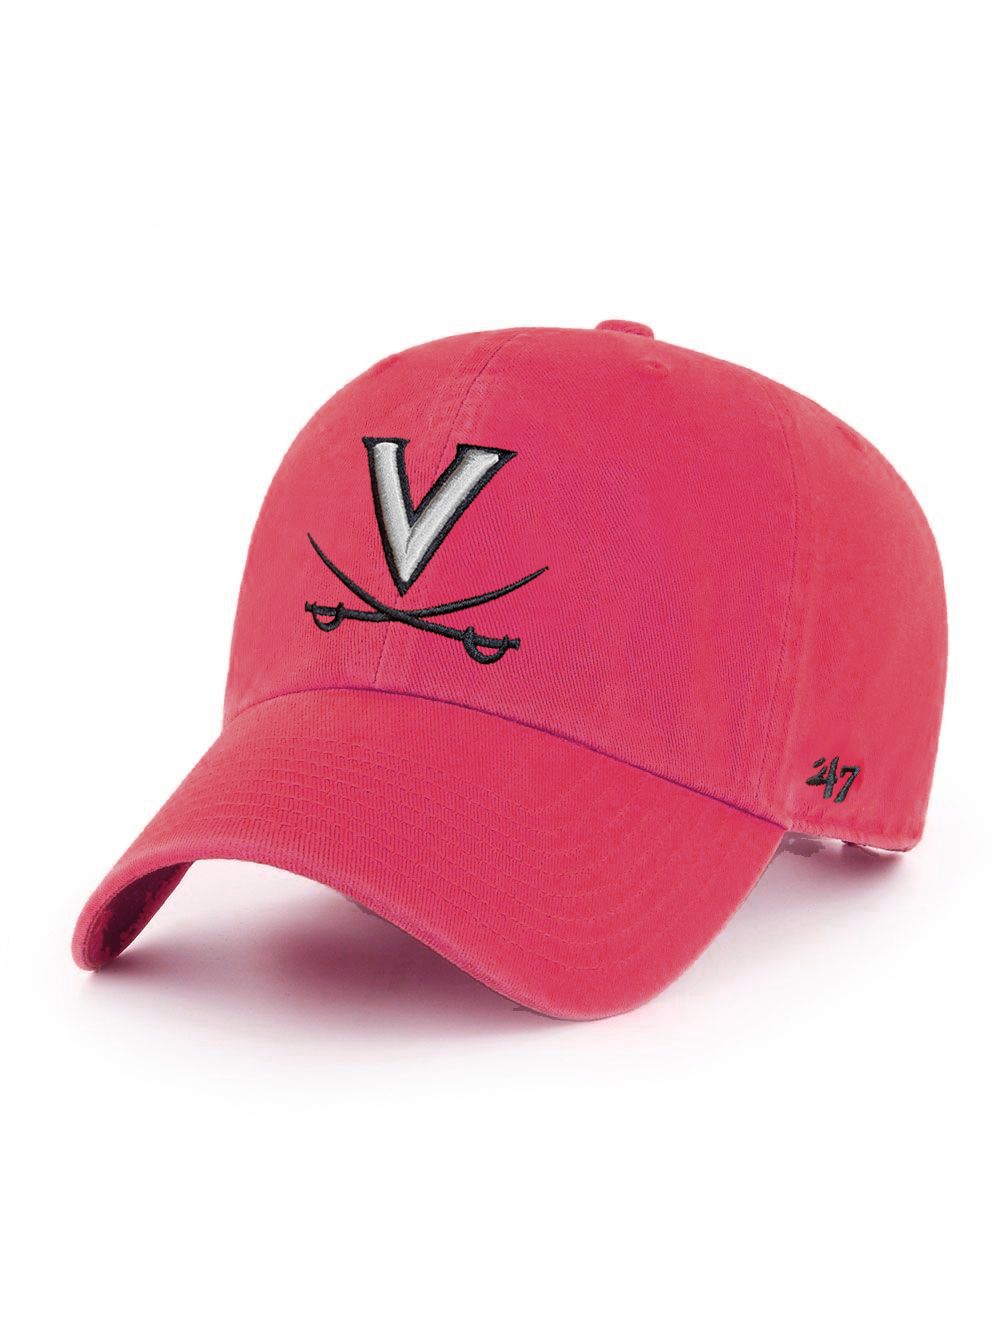 https://mincers.com/media/catalog/product/cache/33958134c3eee94557aec7c86a48adbc/rdi/rdi/47-brand-youth-pink-v-and-crossed-sabers-hat-47-brand-197-youth-pink-saber_1.jpg